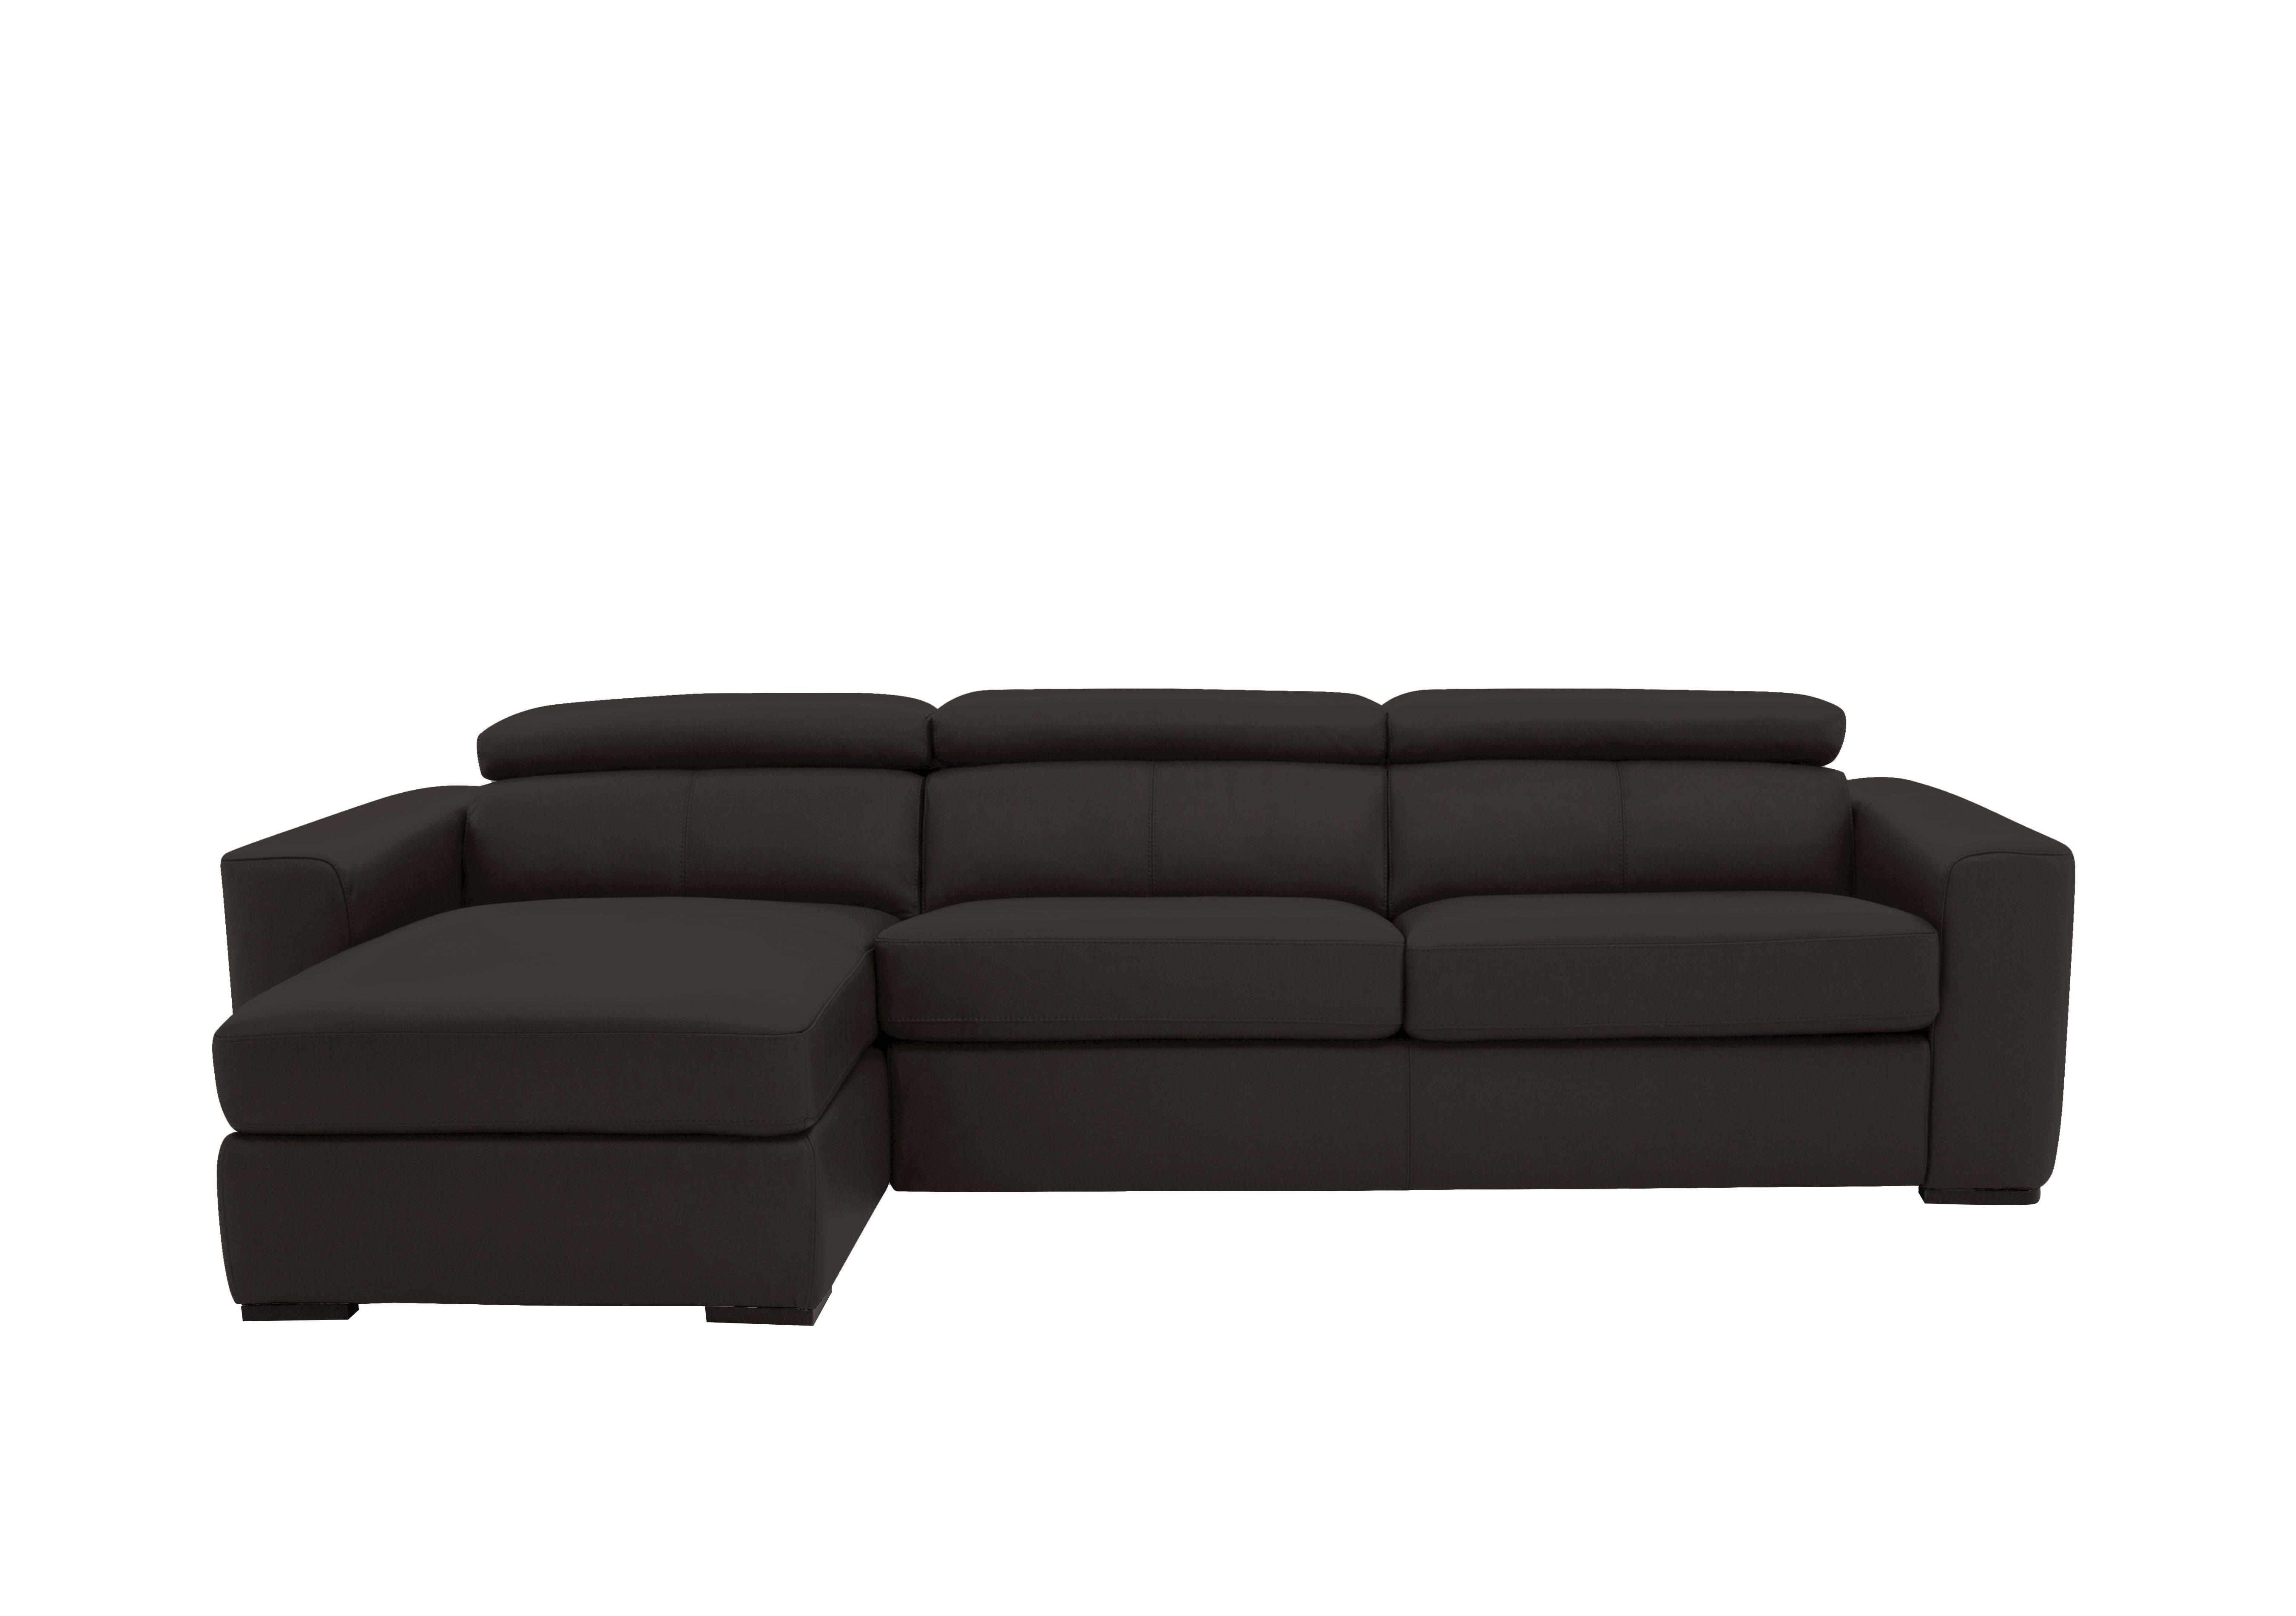 Infinity Leather Corner Chaise Sofabed with Storage in Bv-1748 Dark Chocolate on Furniture Village